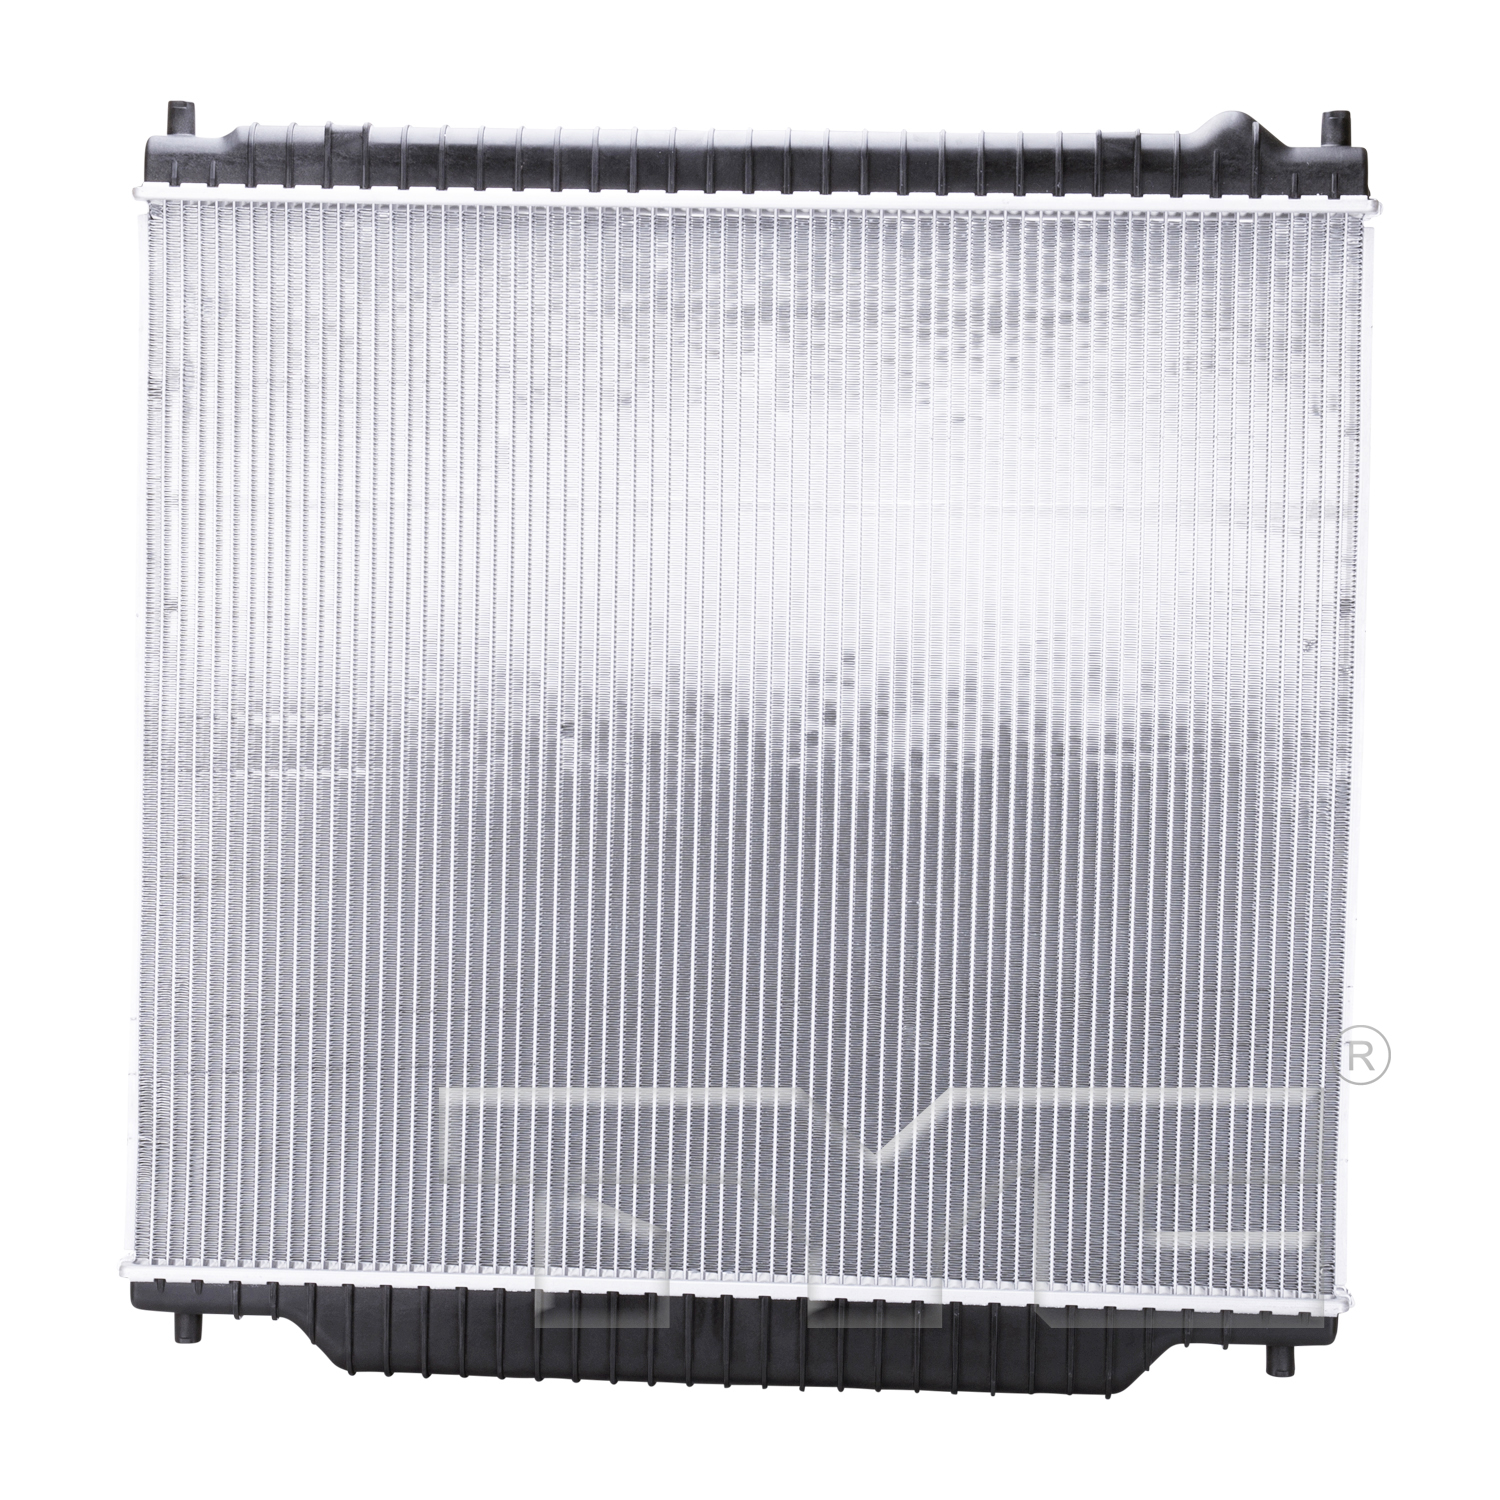 Aftermarket RADIATORS for FORD - F-350 SUPER DUTY, F-350 SUPER DUTY,99-04,Radiator assembly